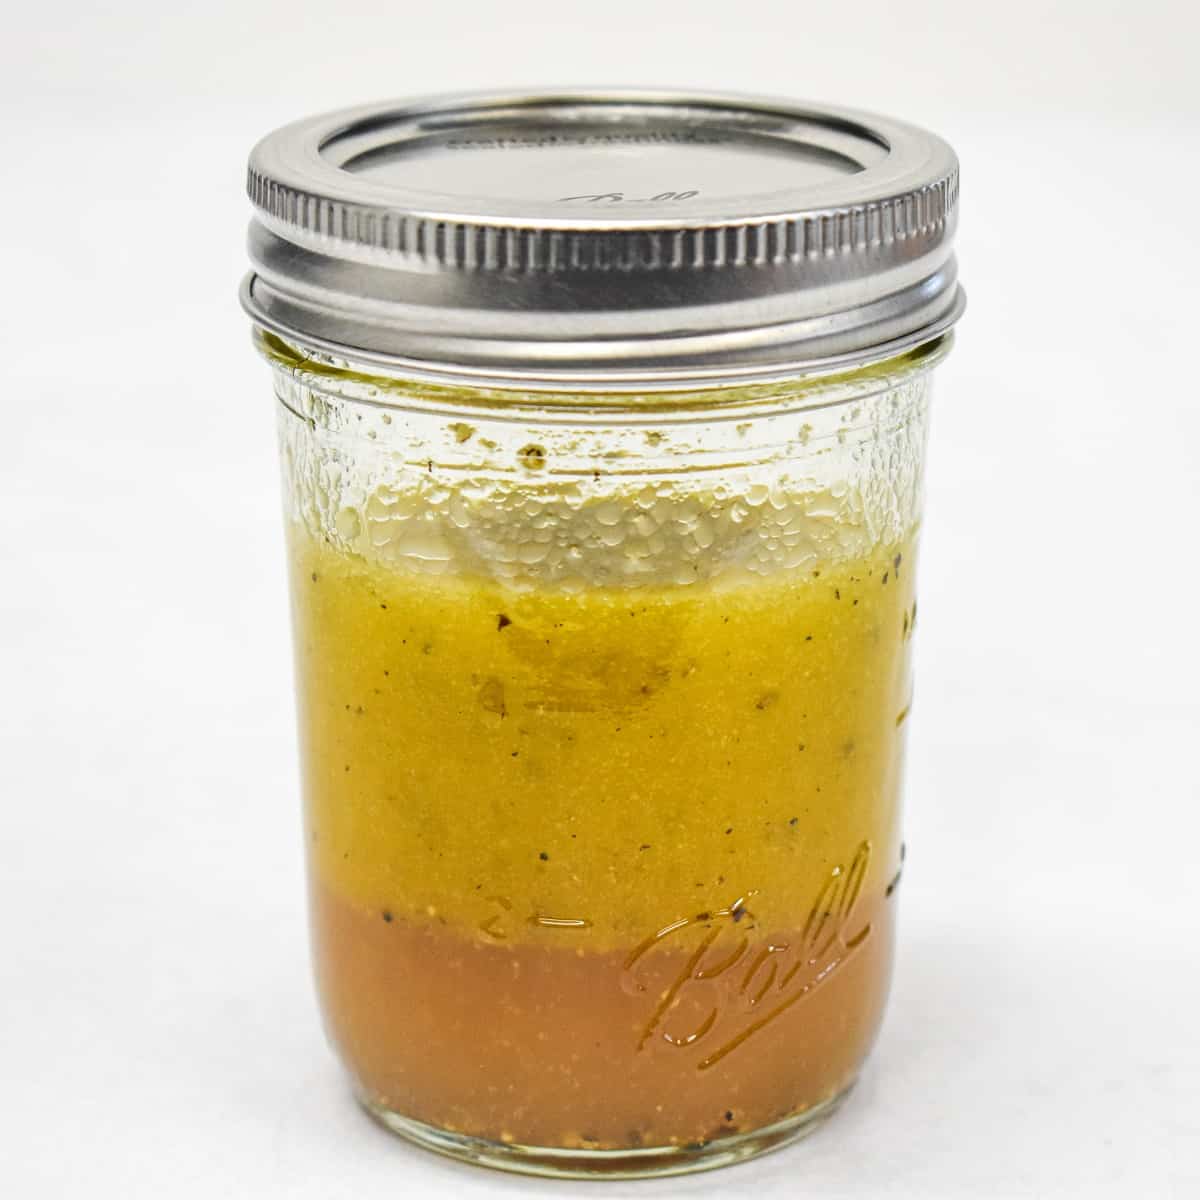 The dressing for the salad in a small canning jar set on a white table.